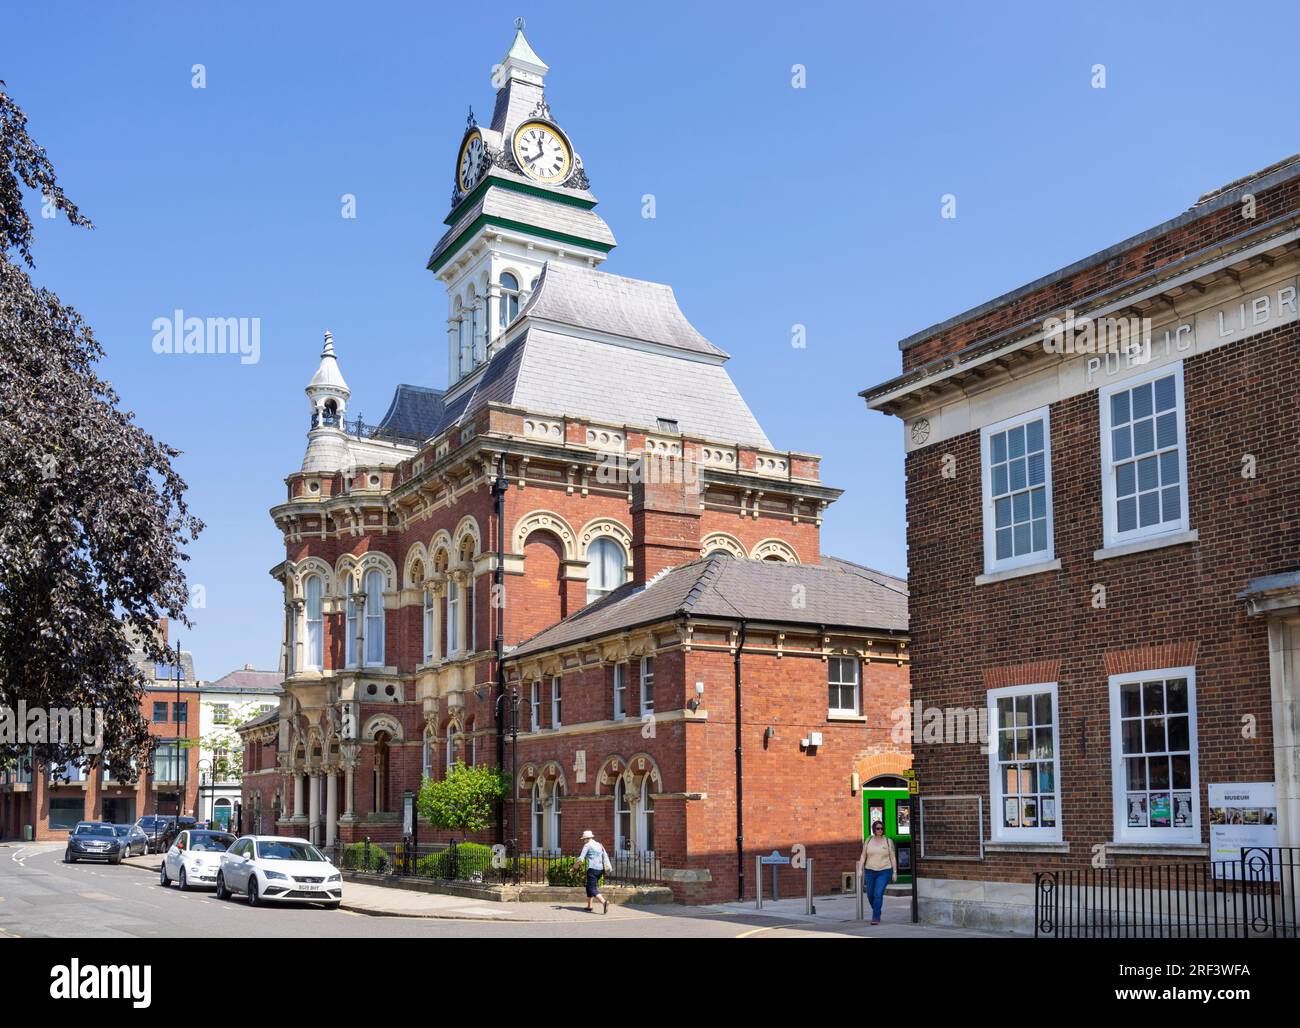 Grantham Lincolnshire Grantham Guildhall bâtiment municipal sur St Peter's Hill Grantham Lincolnshire Angleterre GB Europe Banque D'Images